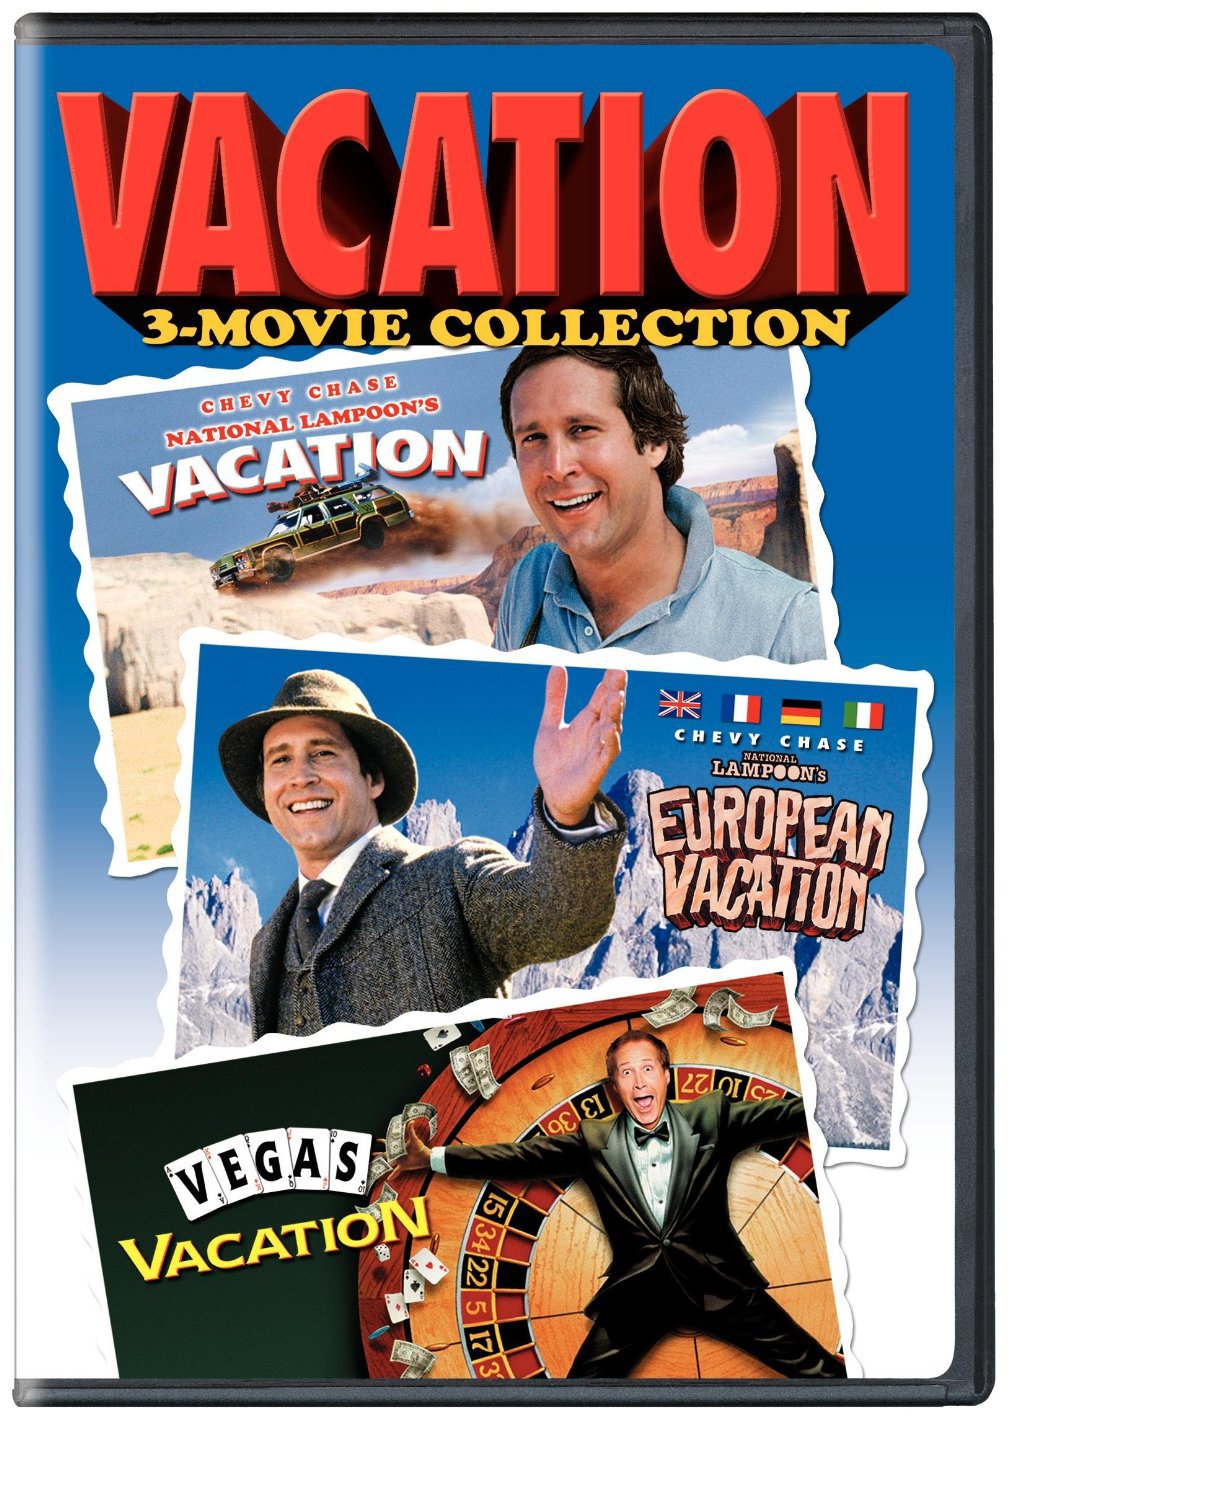 Vacation 3-Movie Collection